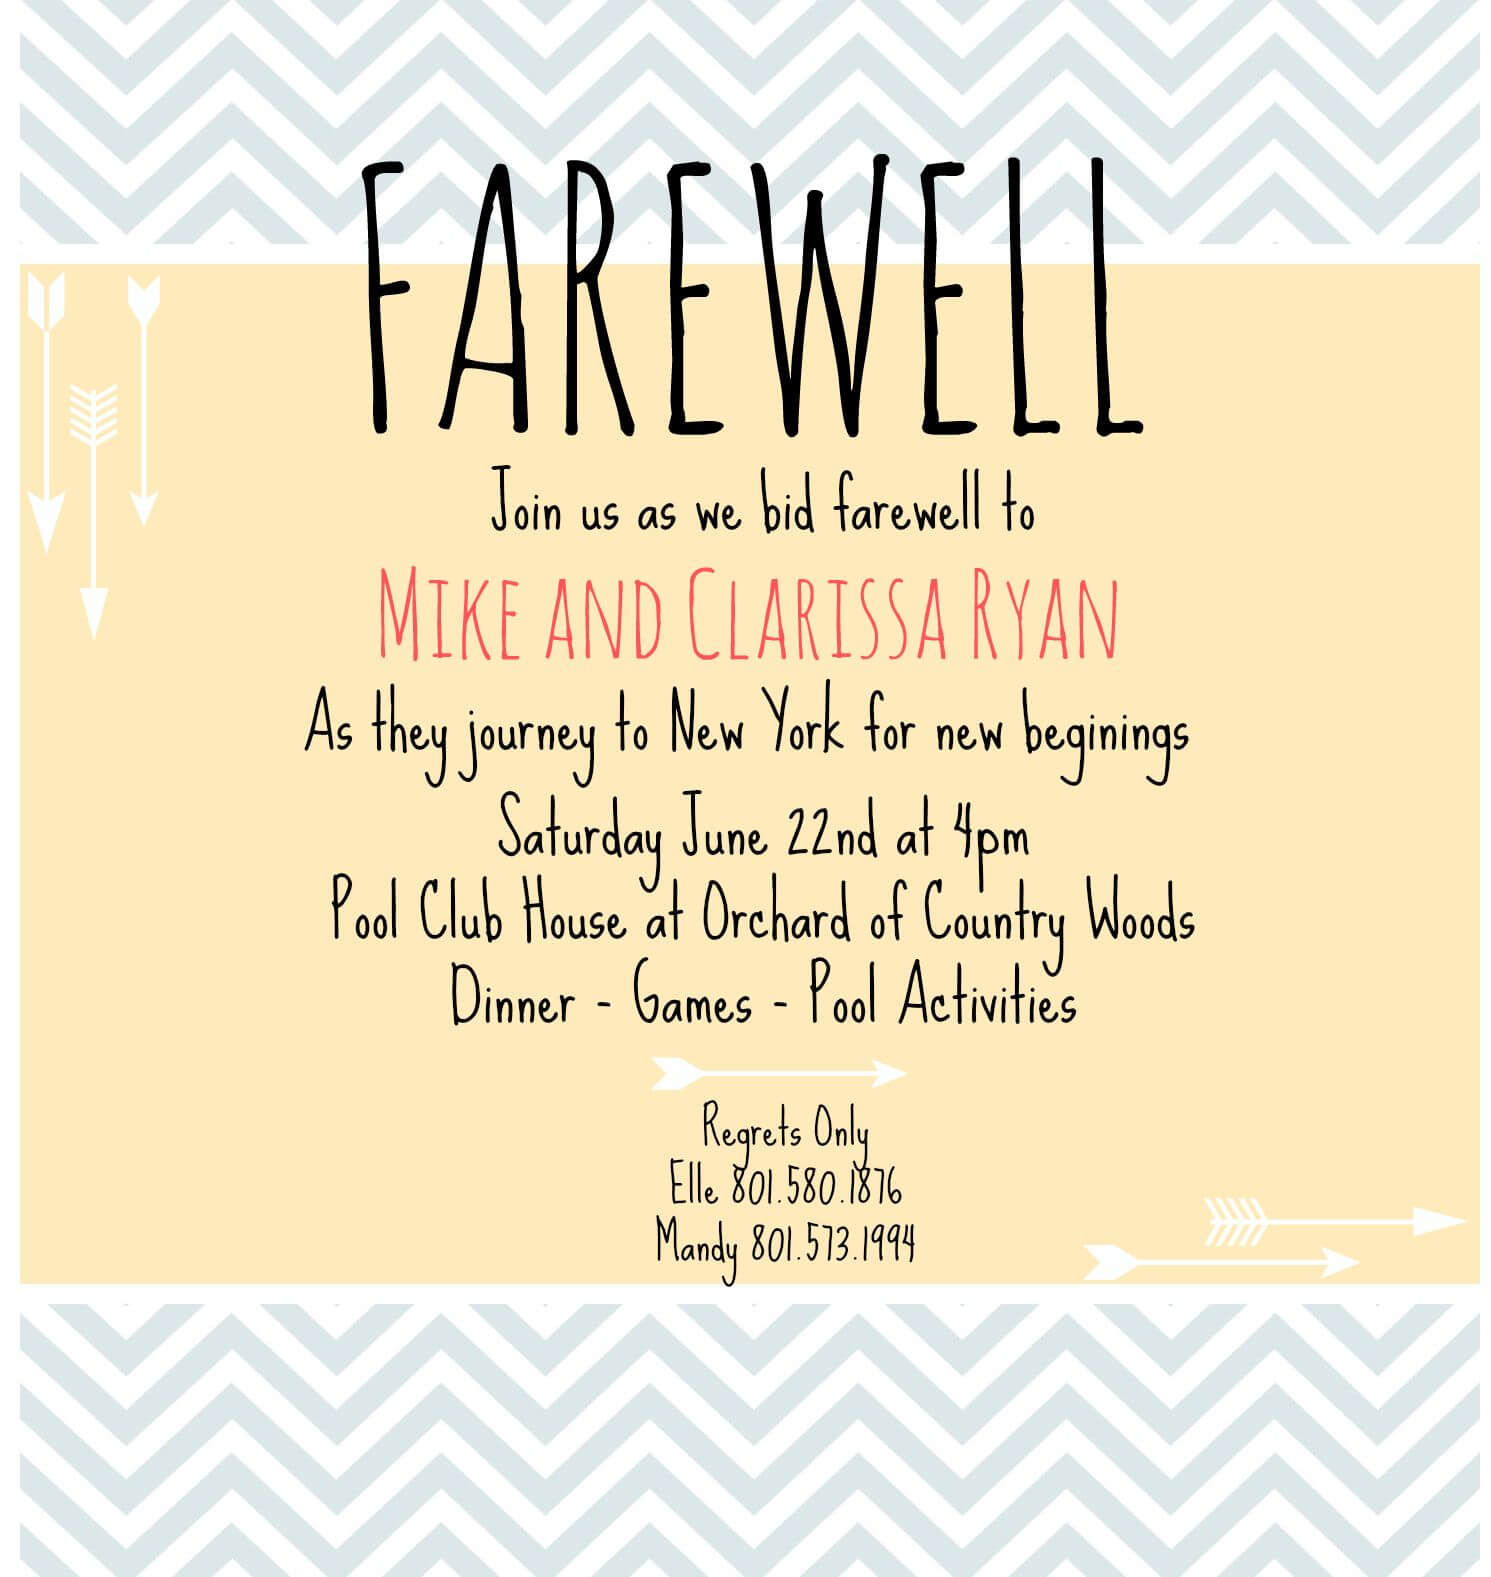 Farewell Invite | Picmonkey Creations | Farewell Party With Farewell Invitation Card Template